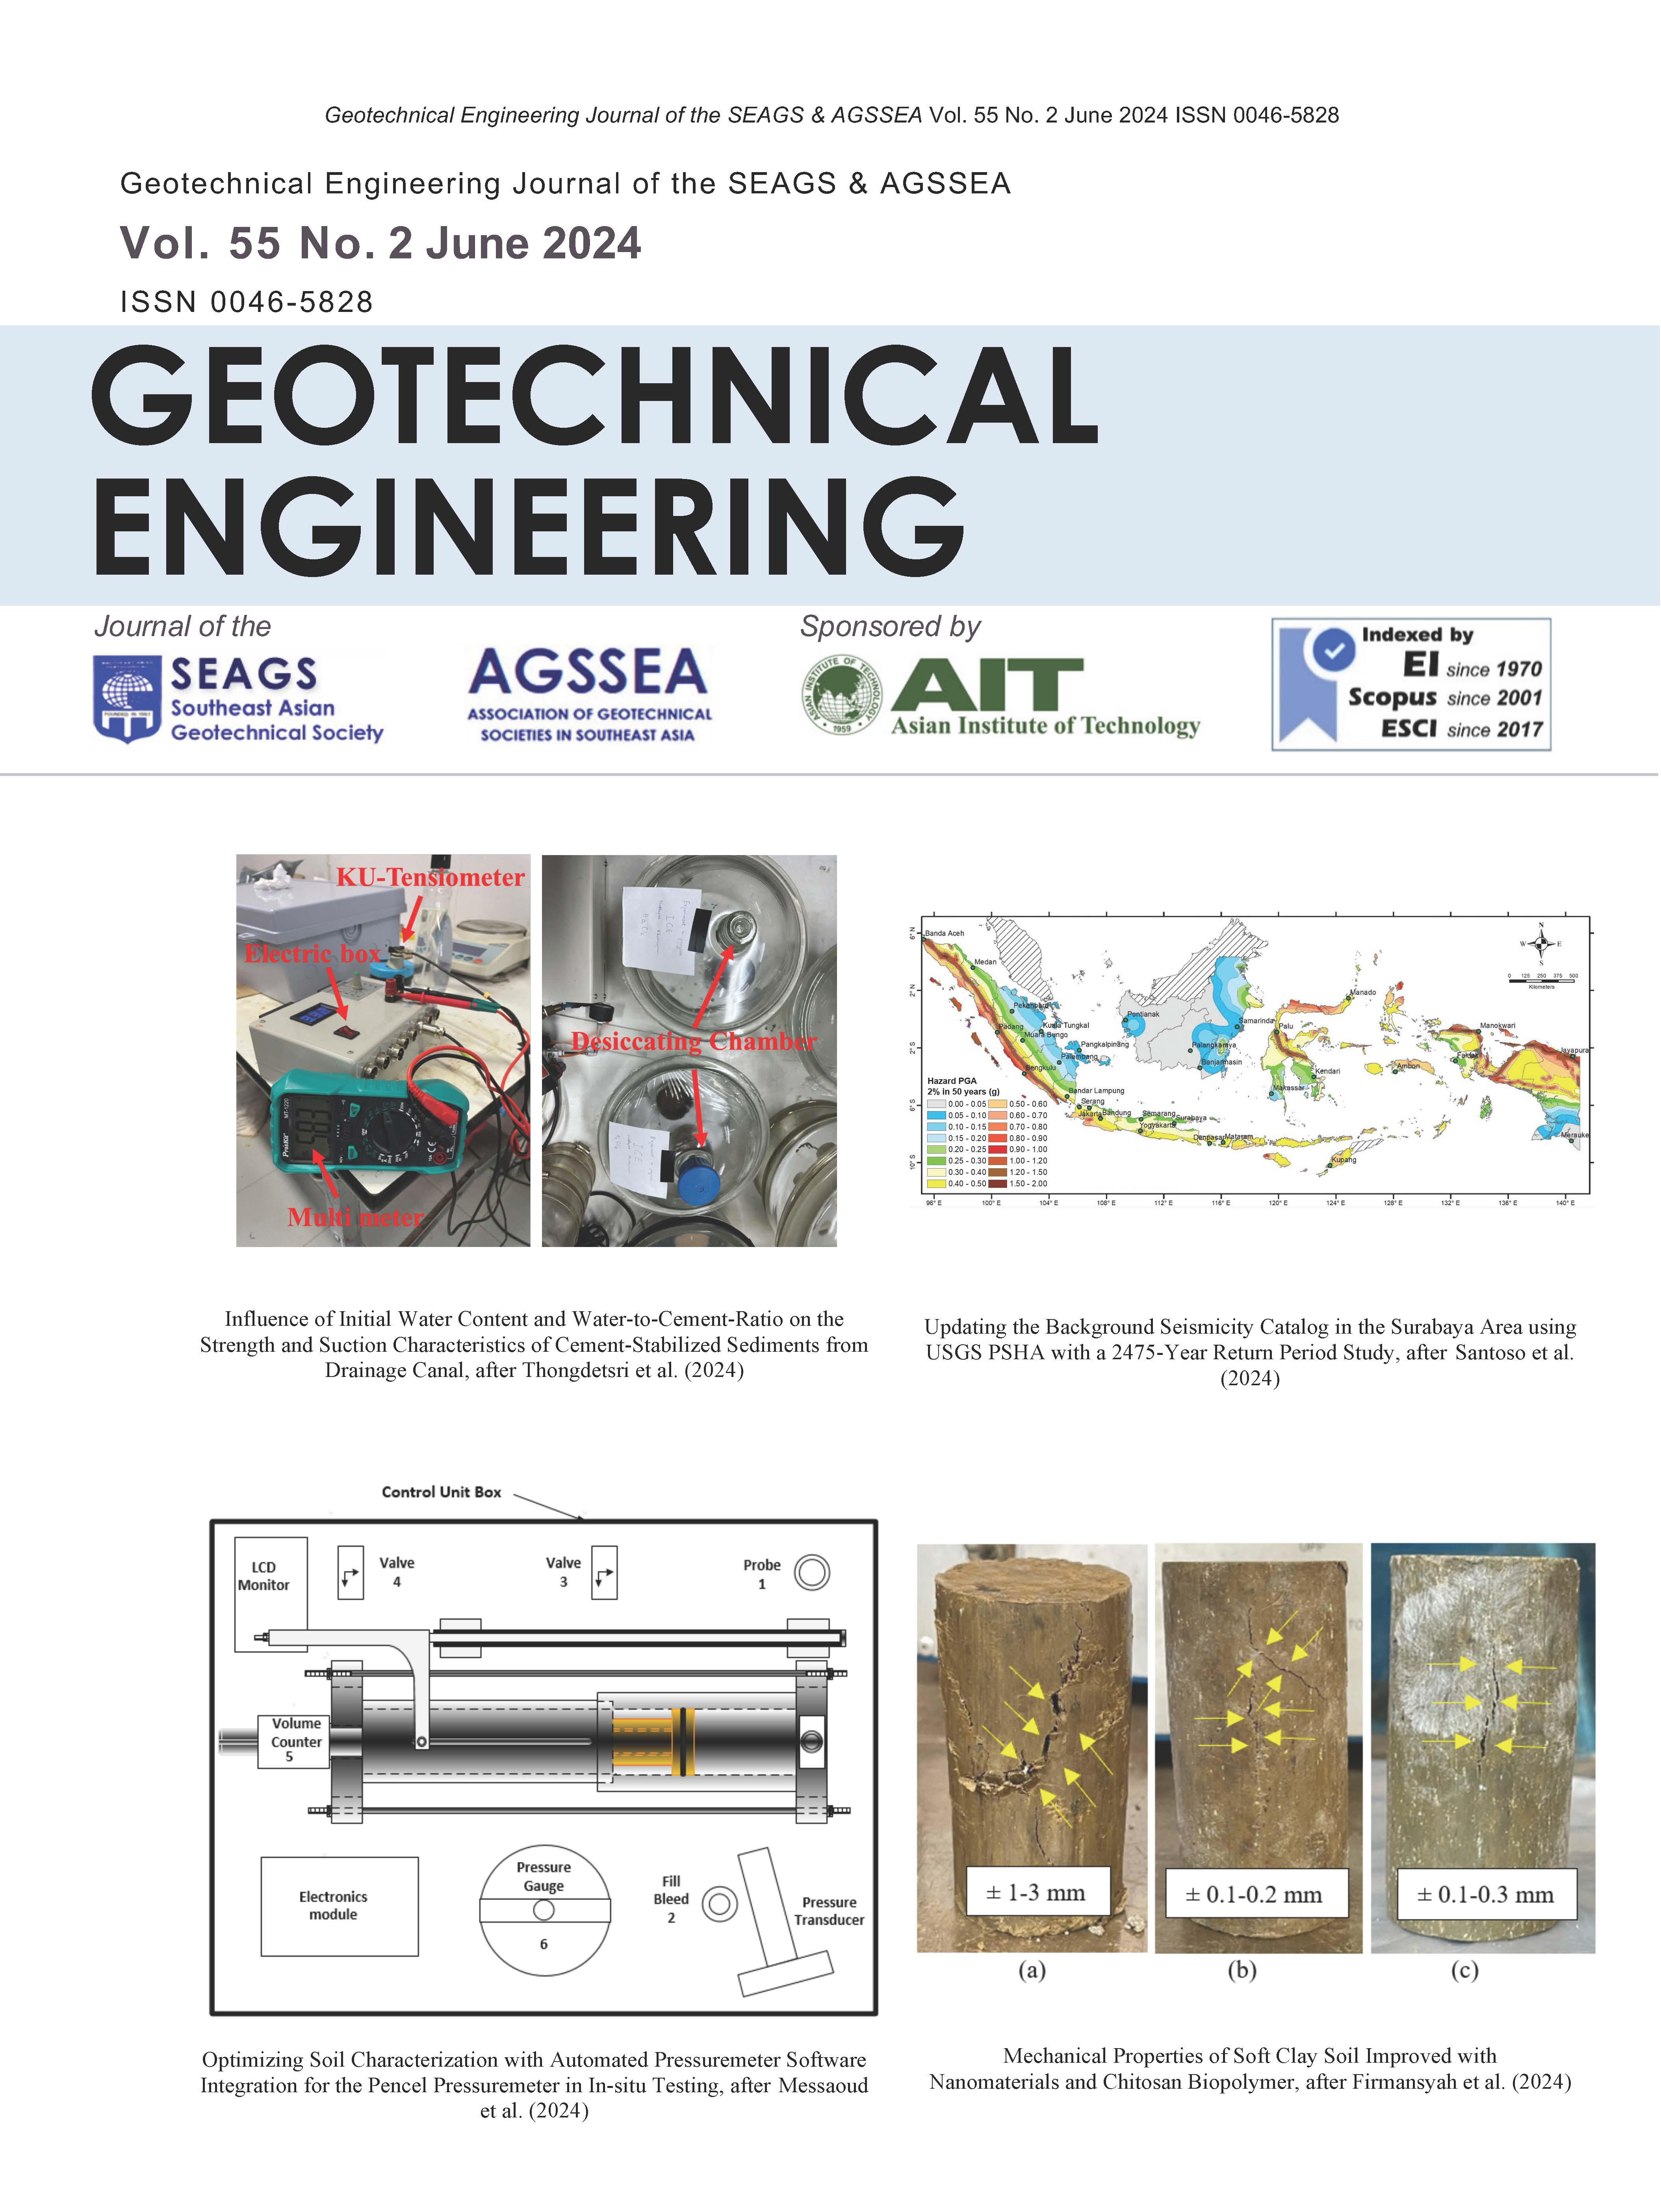 Geotechnical Engineering Journal of the SEAGS&AGSSEA Volume 55 Number 2 June 2024 Issue